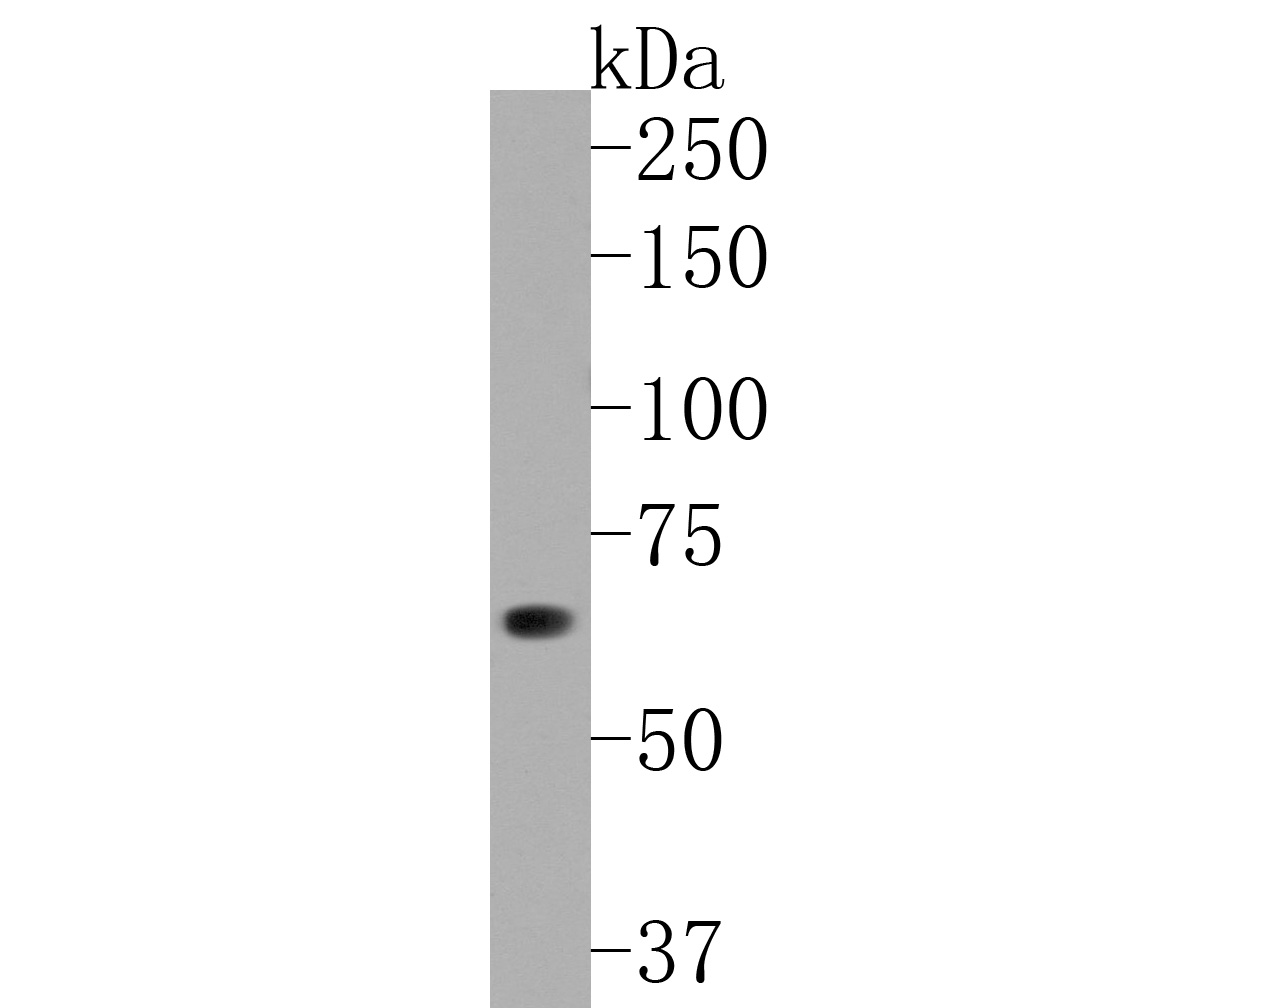 Western blot analysis of GBP1 on human small intestine tissue lysates. Proteins were transferred to a PVDF membrane and blocked with 5% NFDM/TBST for 1 hour at room temperature. The primary antibody (HA720049, 1/500) was used in 5% NFDM/TBST at room temperature for 2 hours. Goat Anti-Rabbit IgG - HRP Secondary Antibody (HA1001) at 1:200,000 dilution was used for 1 hour at room temperature.